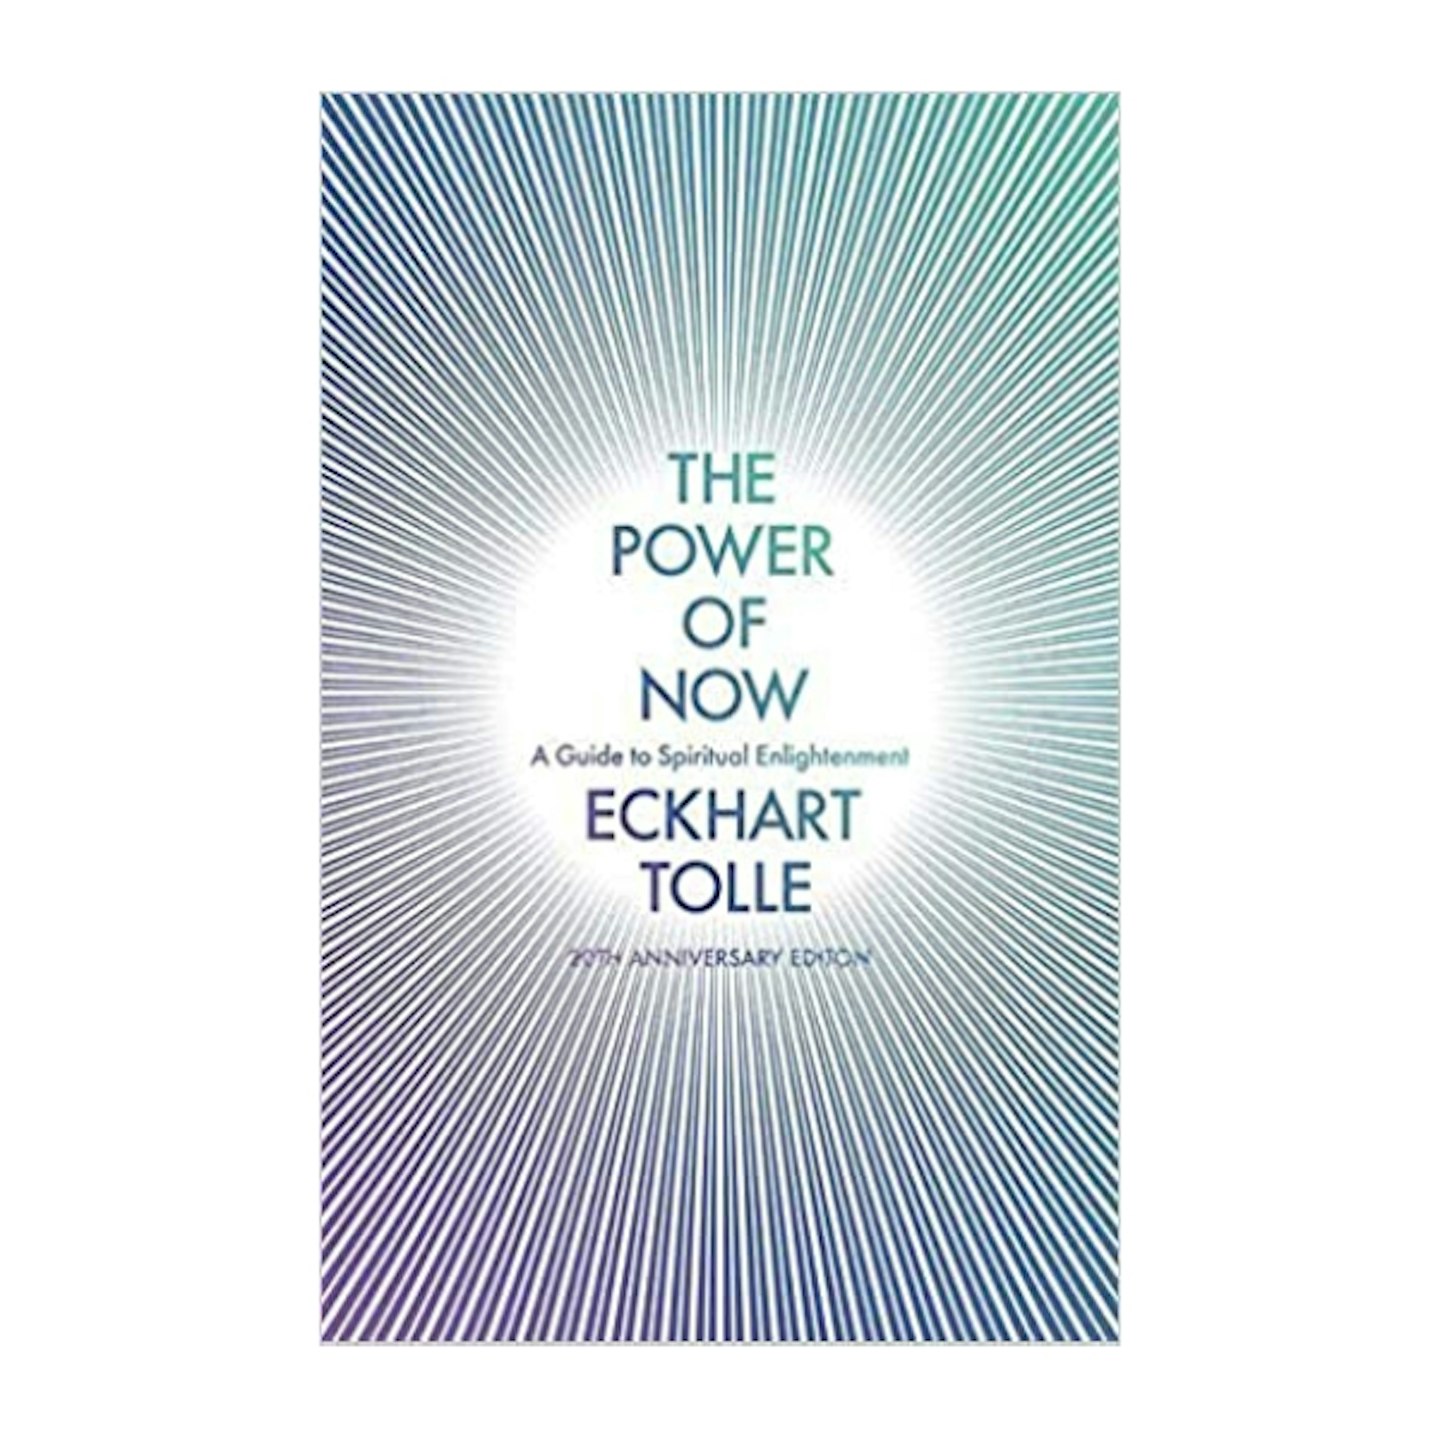 The power of now book cover